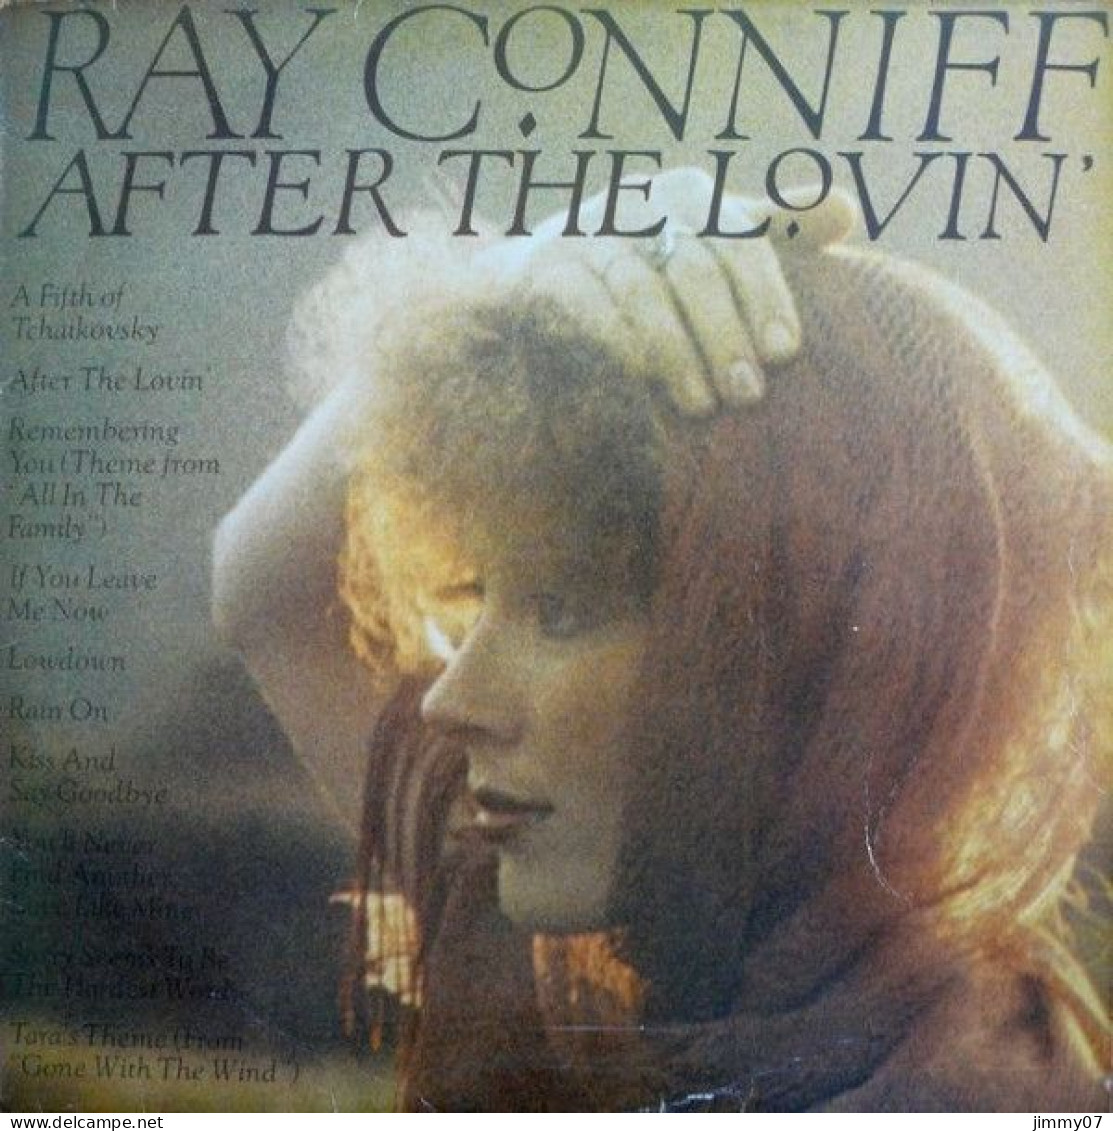 Ray Conniff - After The Lovin' (LP) - Jazz